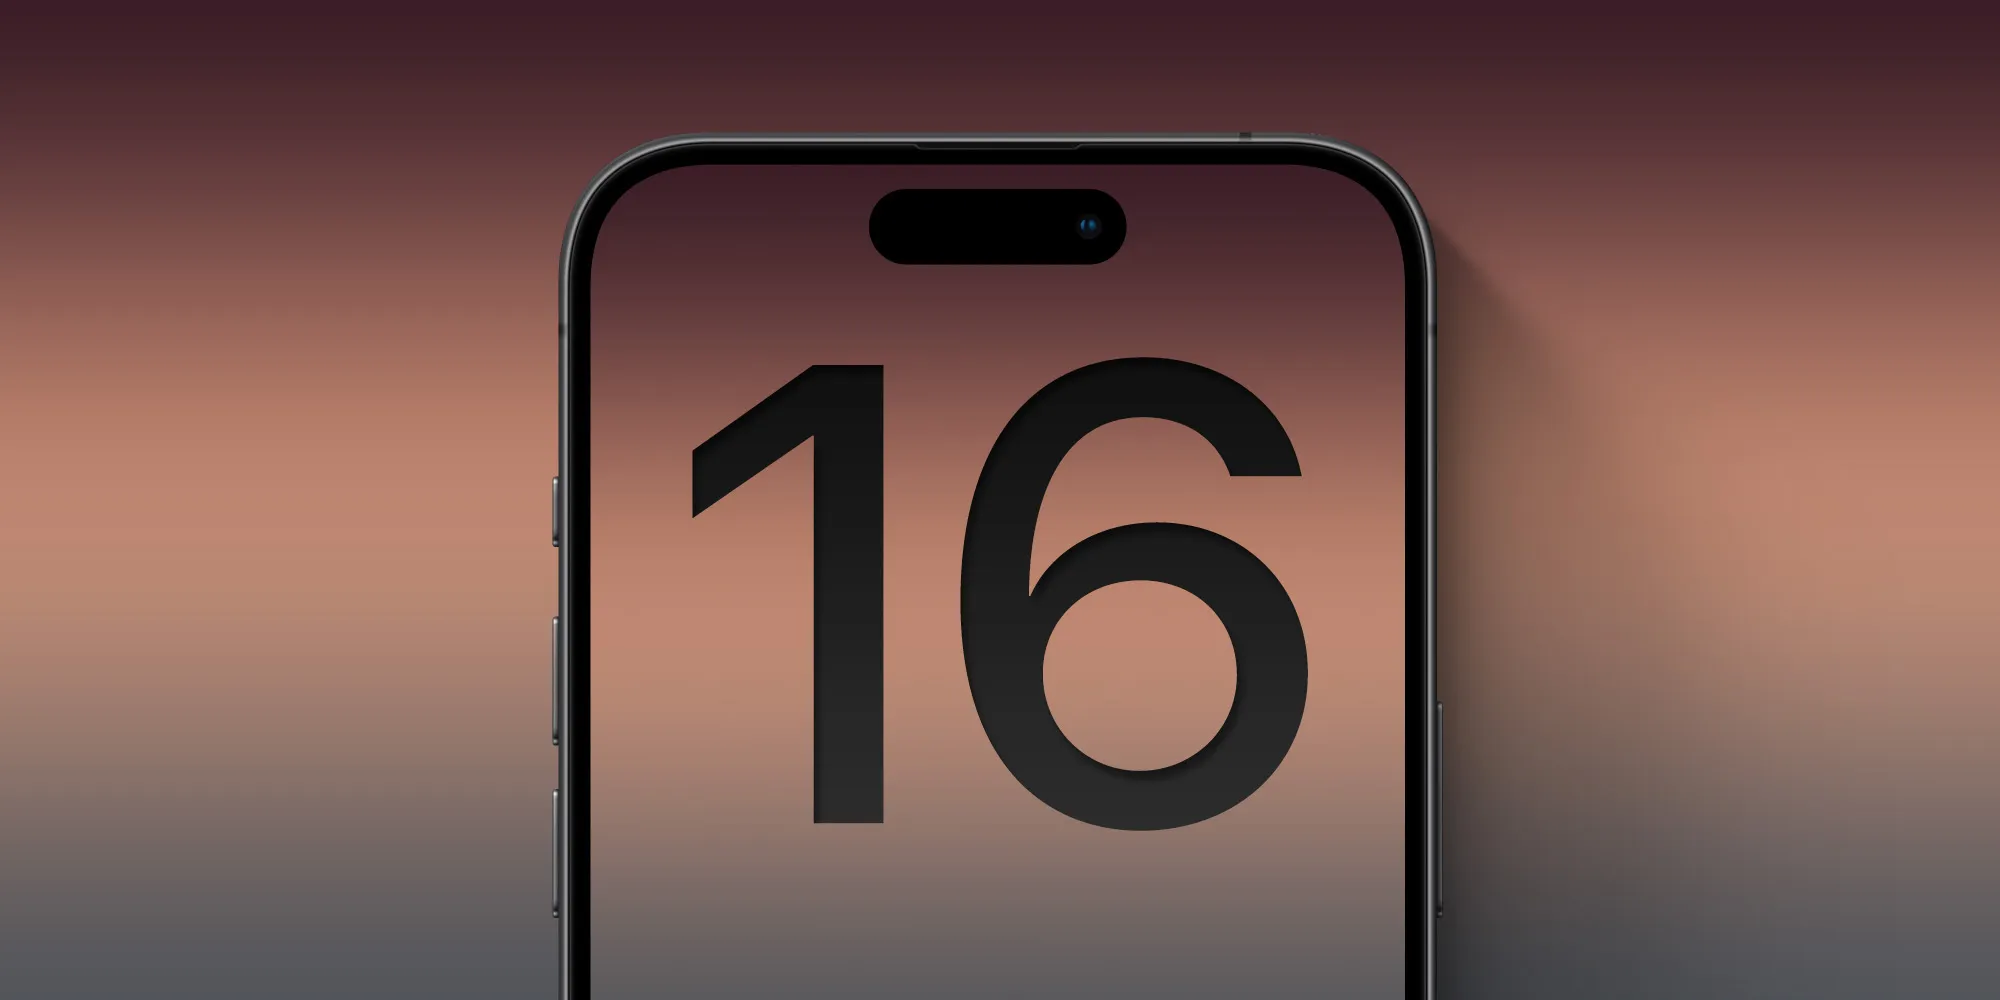 Big Changes Ahead: What to Expect from iPhone 16 Pro's New Camera Features